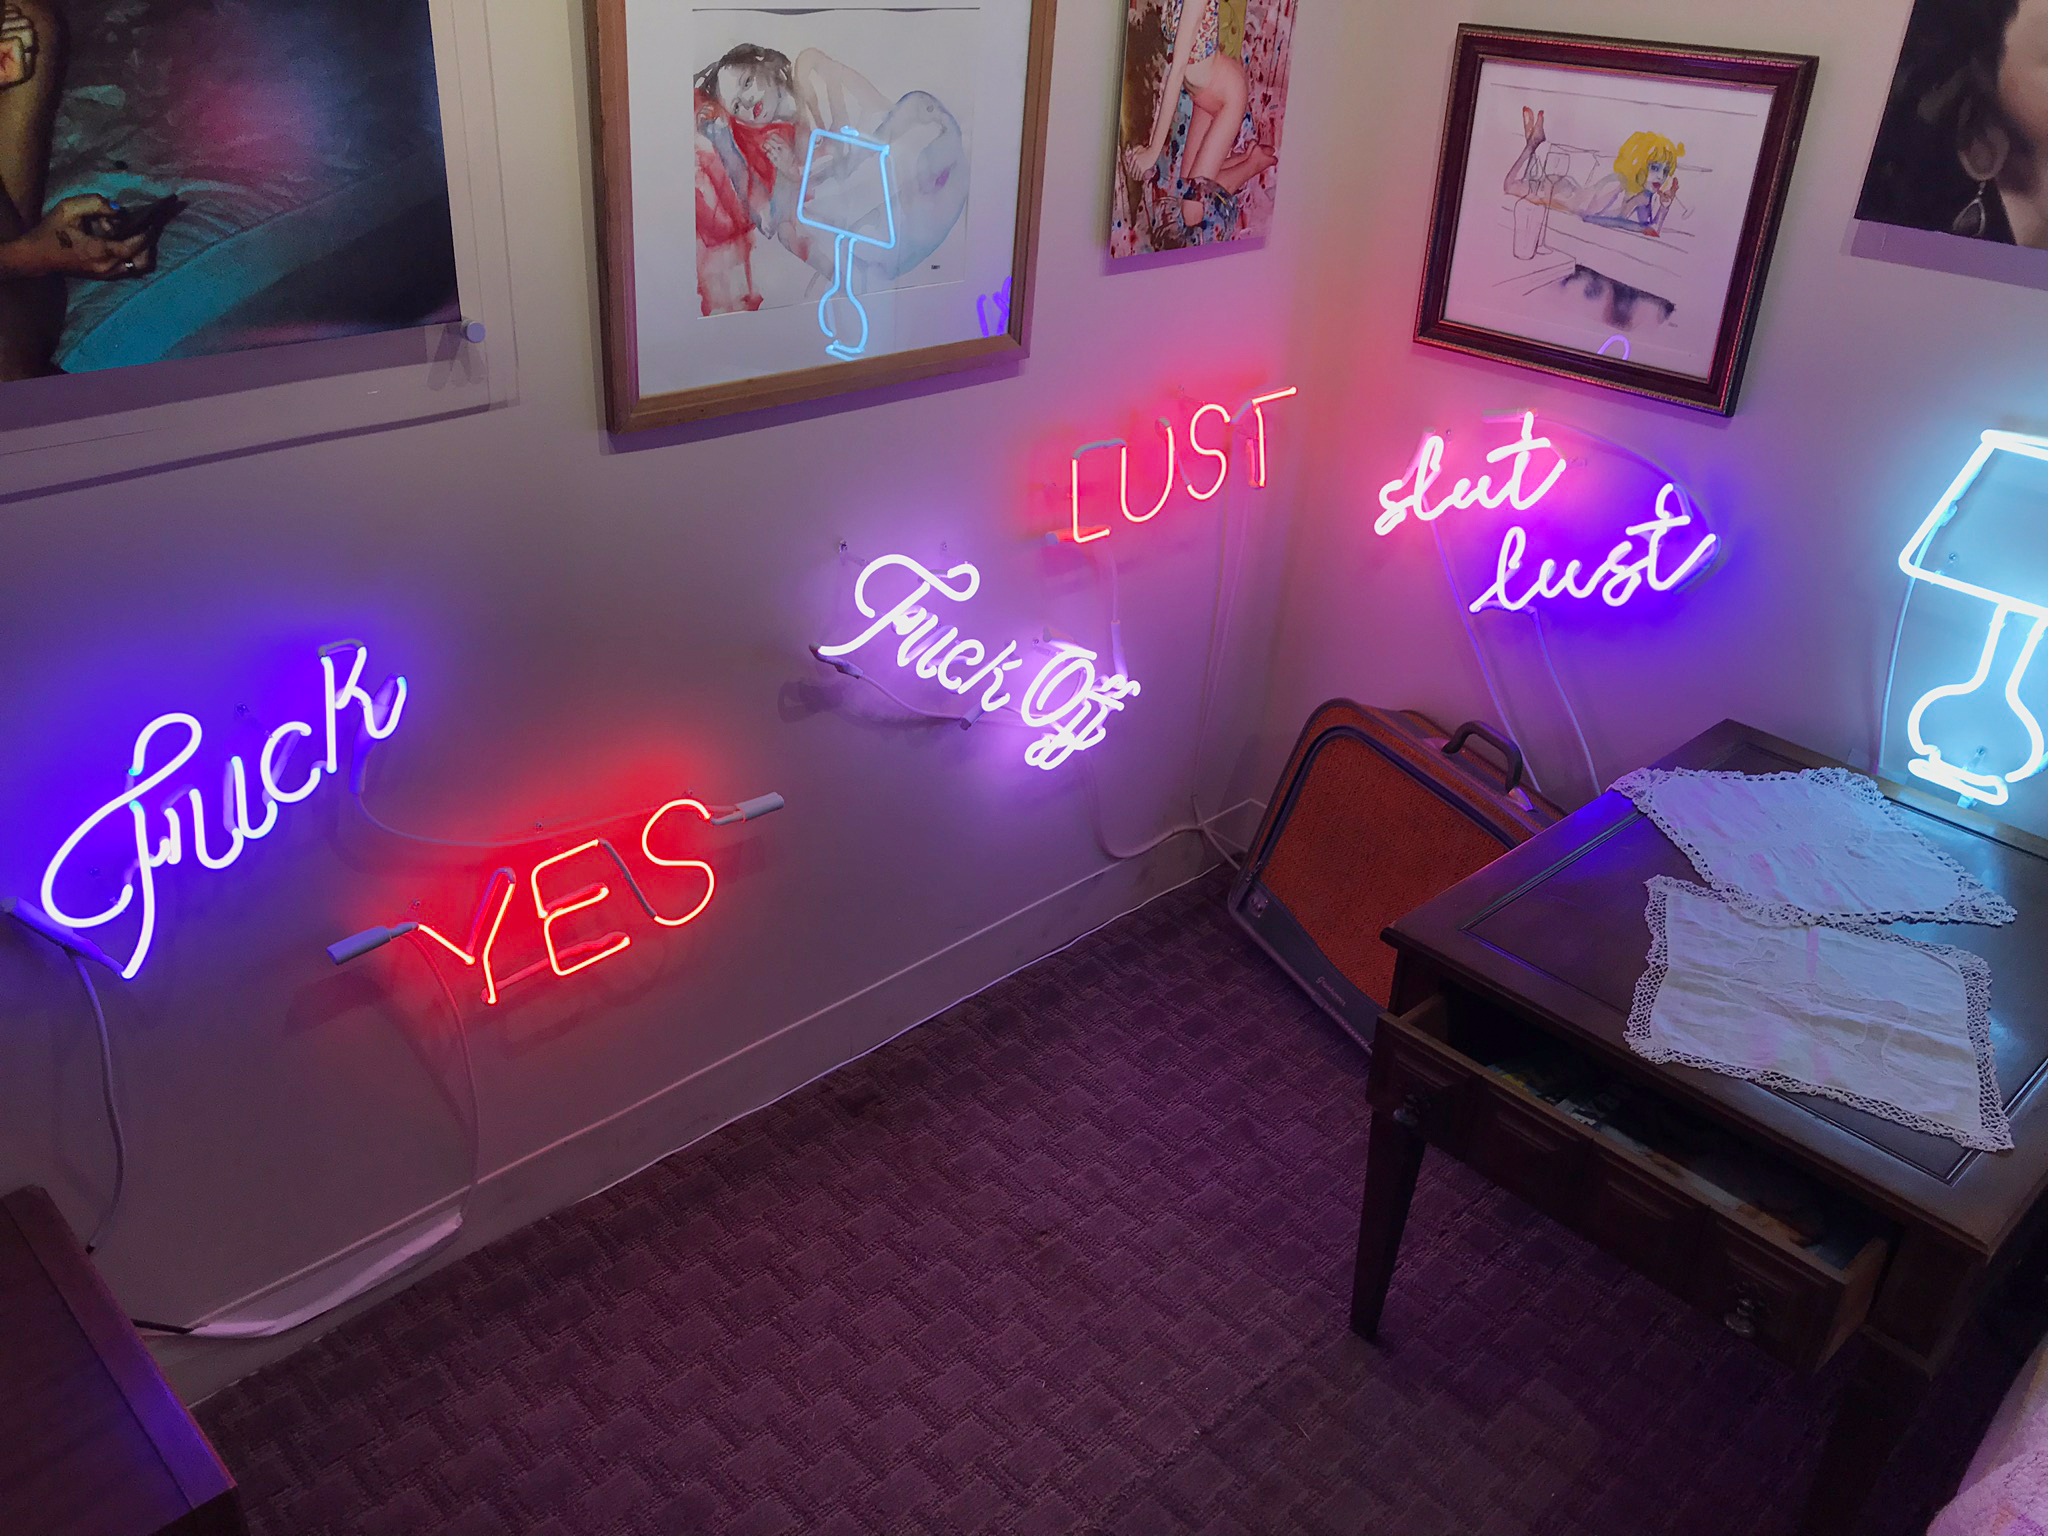 22HOTEL-XX22-by-Indira-Cesarine-The-Untitled-Space-at-SPRINGBREAK-ART-SHOW-2018-Install-Neons.jpg